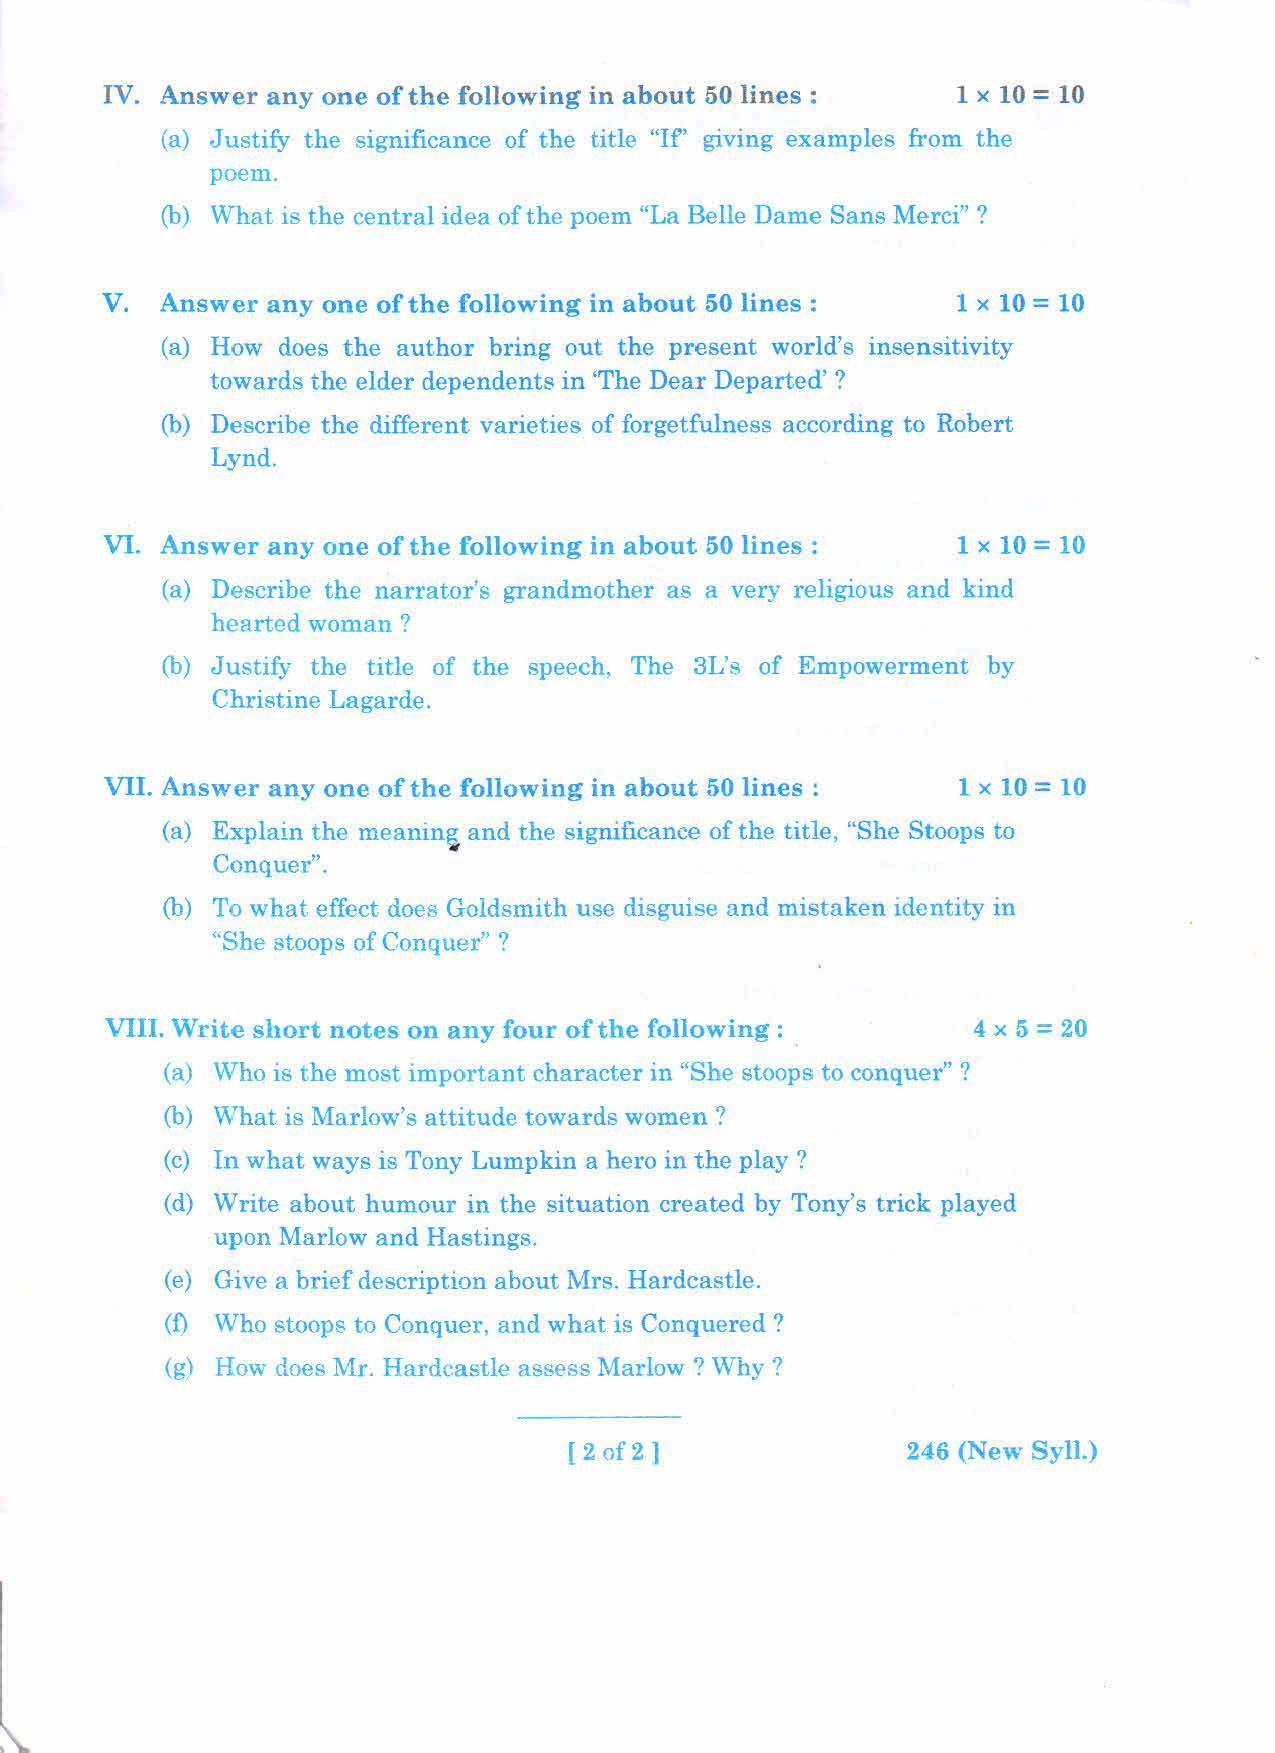 AP 2nd Year General Question Paper March - 2020 - ML ENGLISH-II(NEW) - Page 2